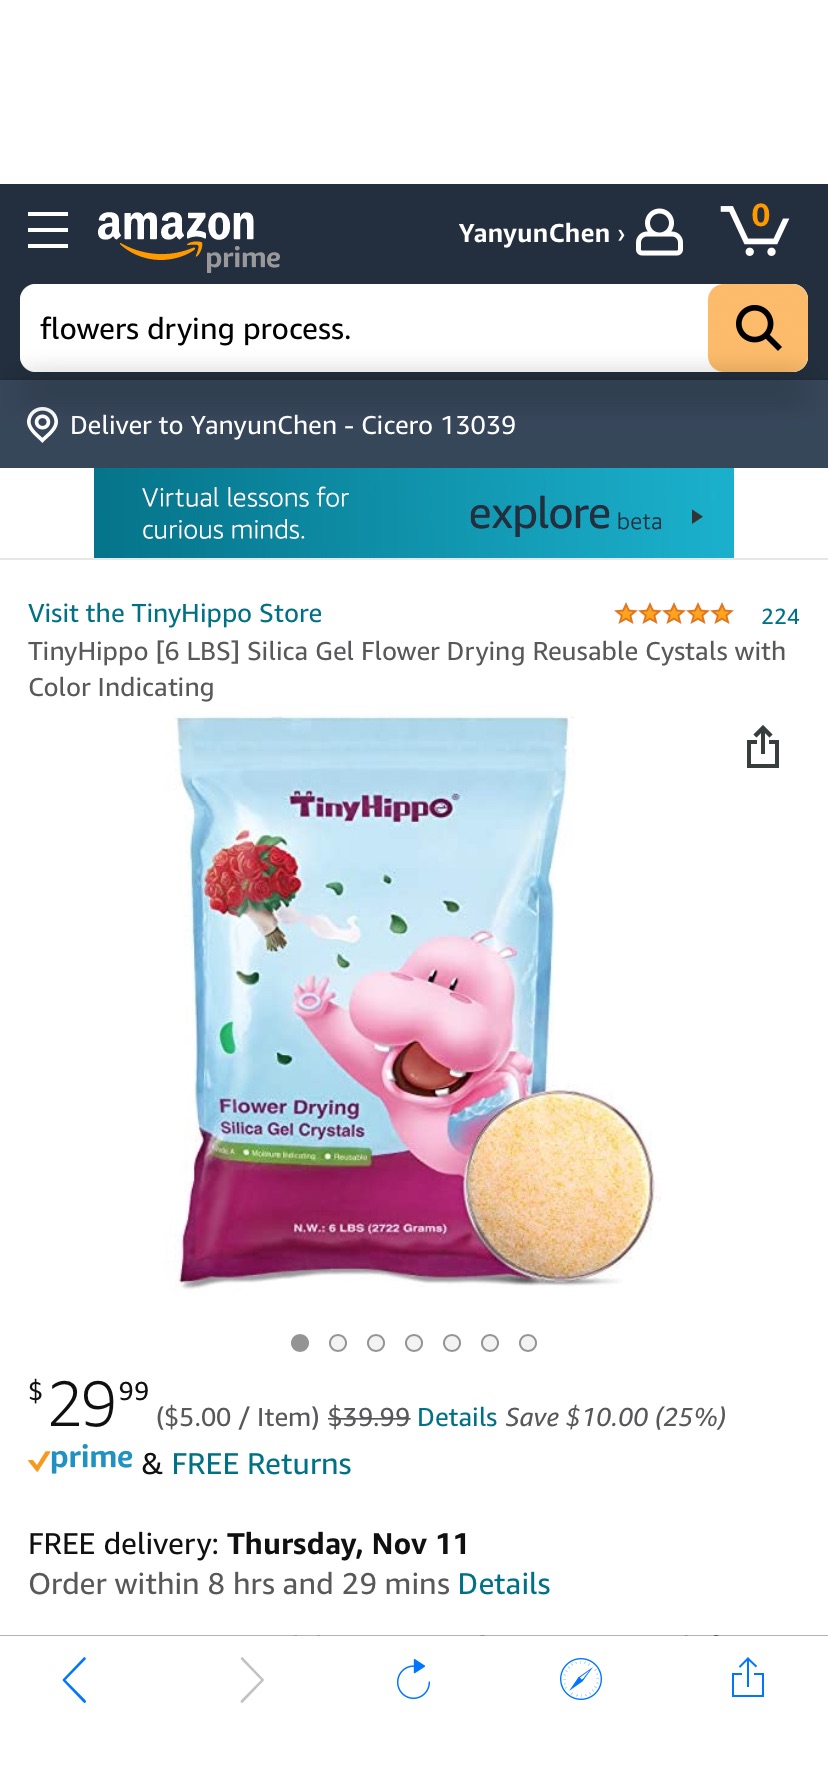 TinyHippo [6 LBS] Silica Gel Flower Drying Reusable Cystals with Color Indicating: Amazon.com: Industrial & Scientific干花保鲜制作